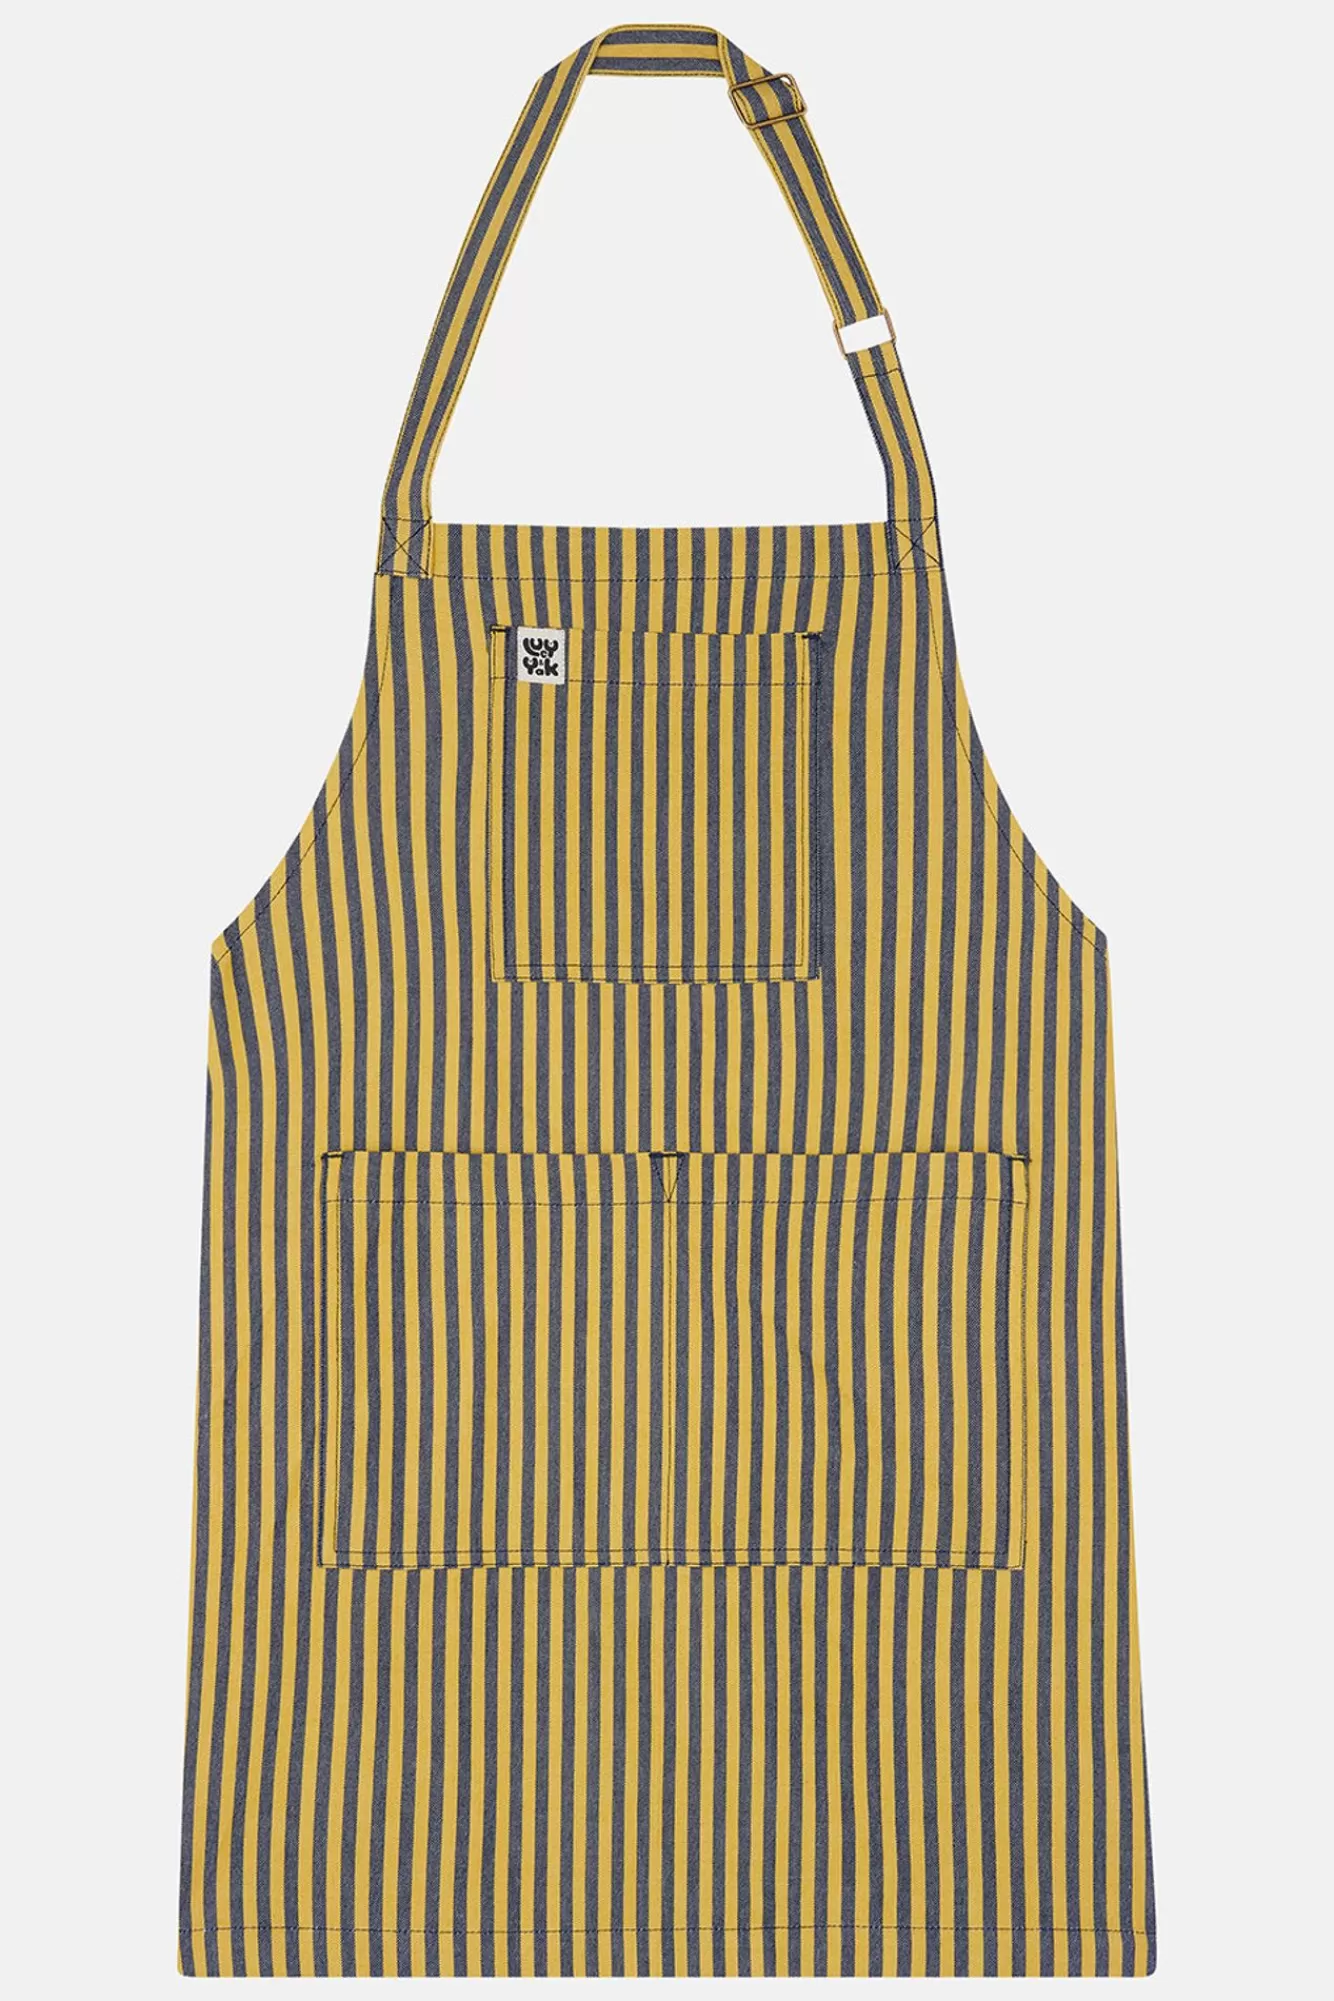 Ada Apron: Deadstock Fabric - Blue & Yellow Stripe-Lucy & Yak Outlet